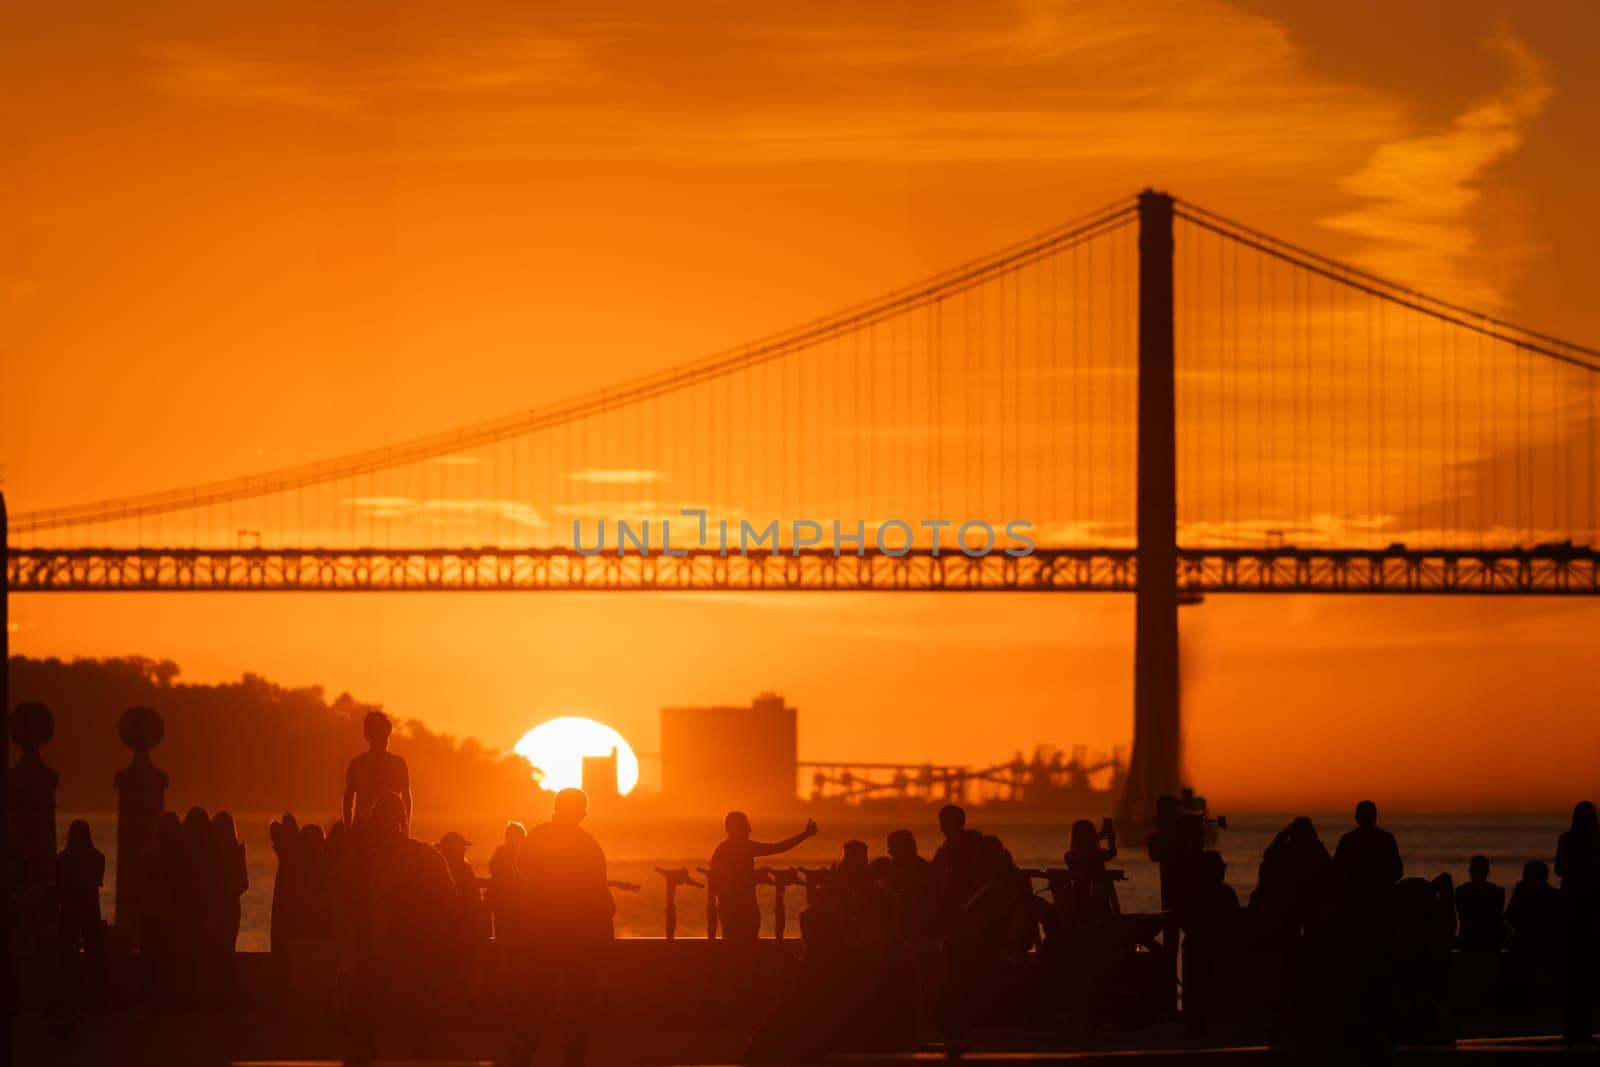 A Serene Sunset at the Majestic Ocean Bridge by Studia72